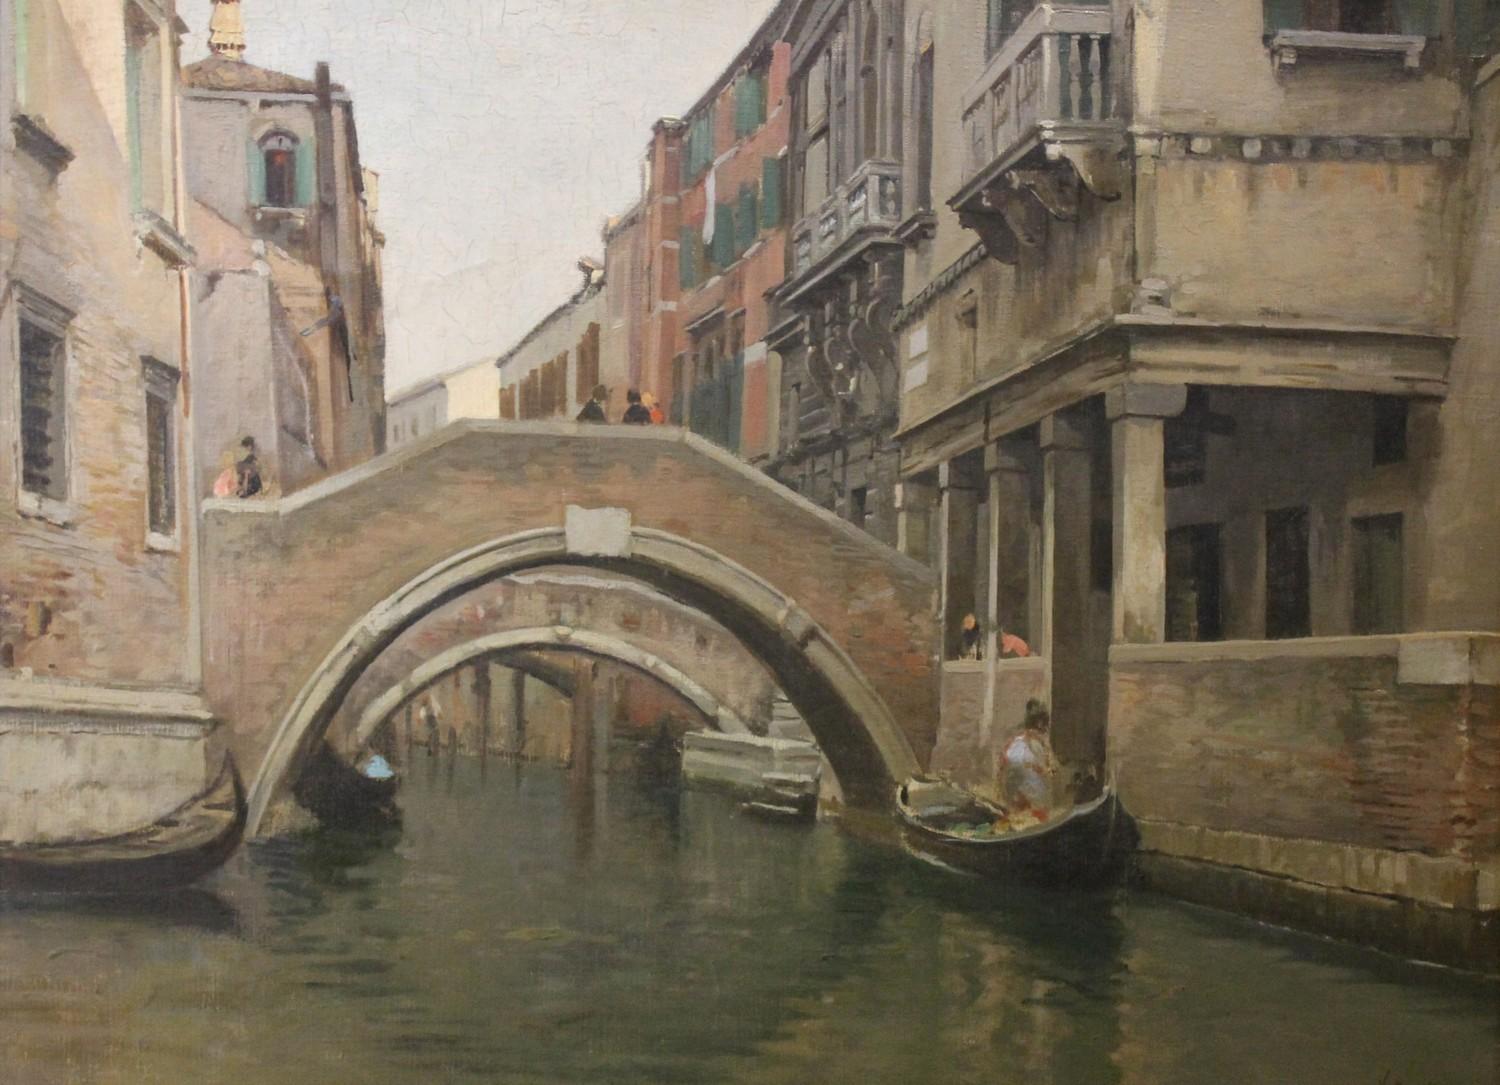 View of Canal in Venice Landscape with Architectures Oil on Canvas Painting 7